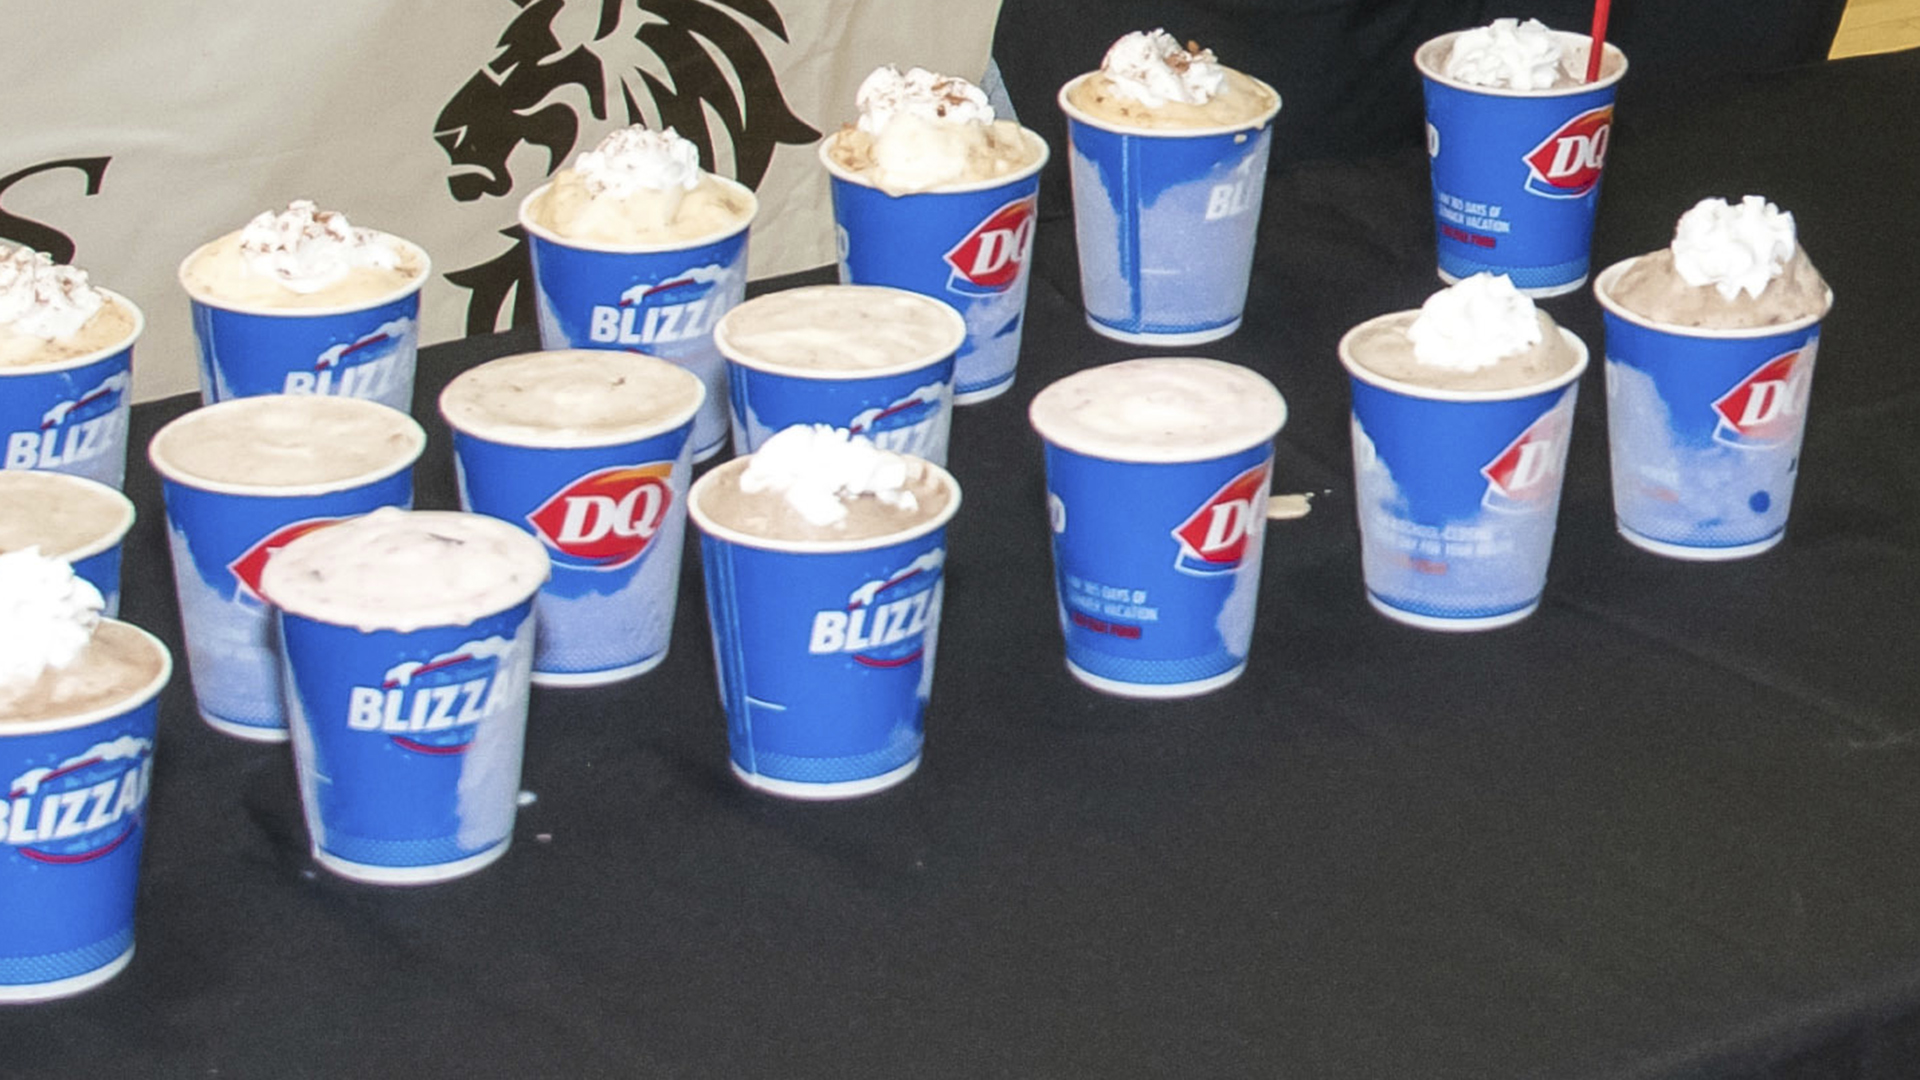 Dairy Queen's Blizzard deal Buy one, get one for 99 cents